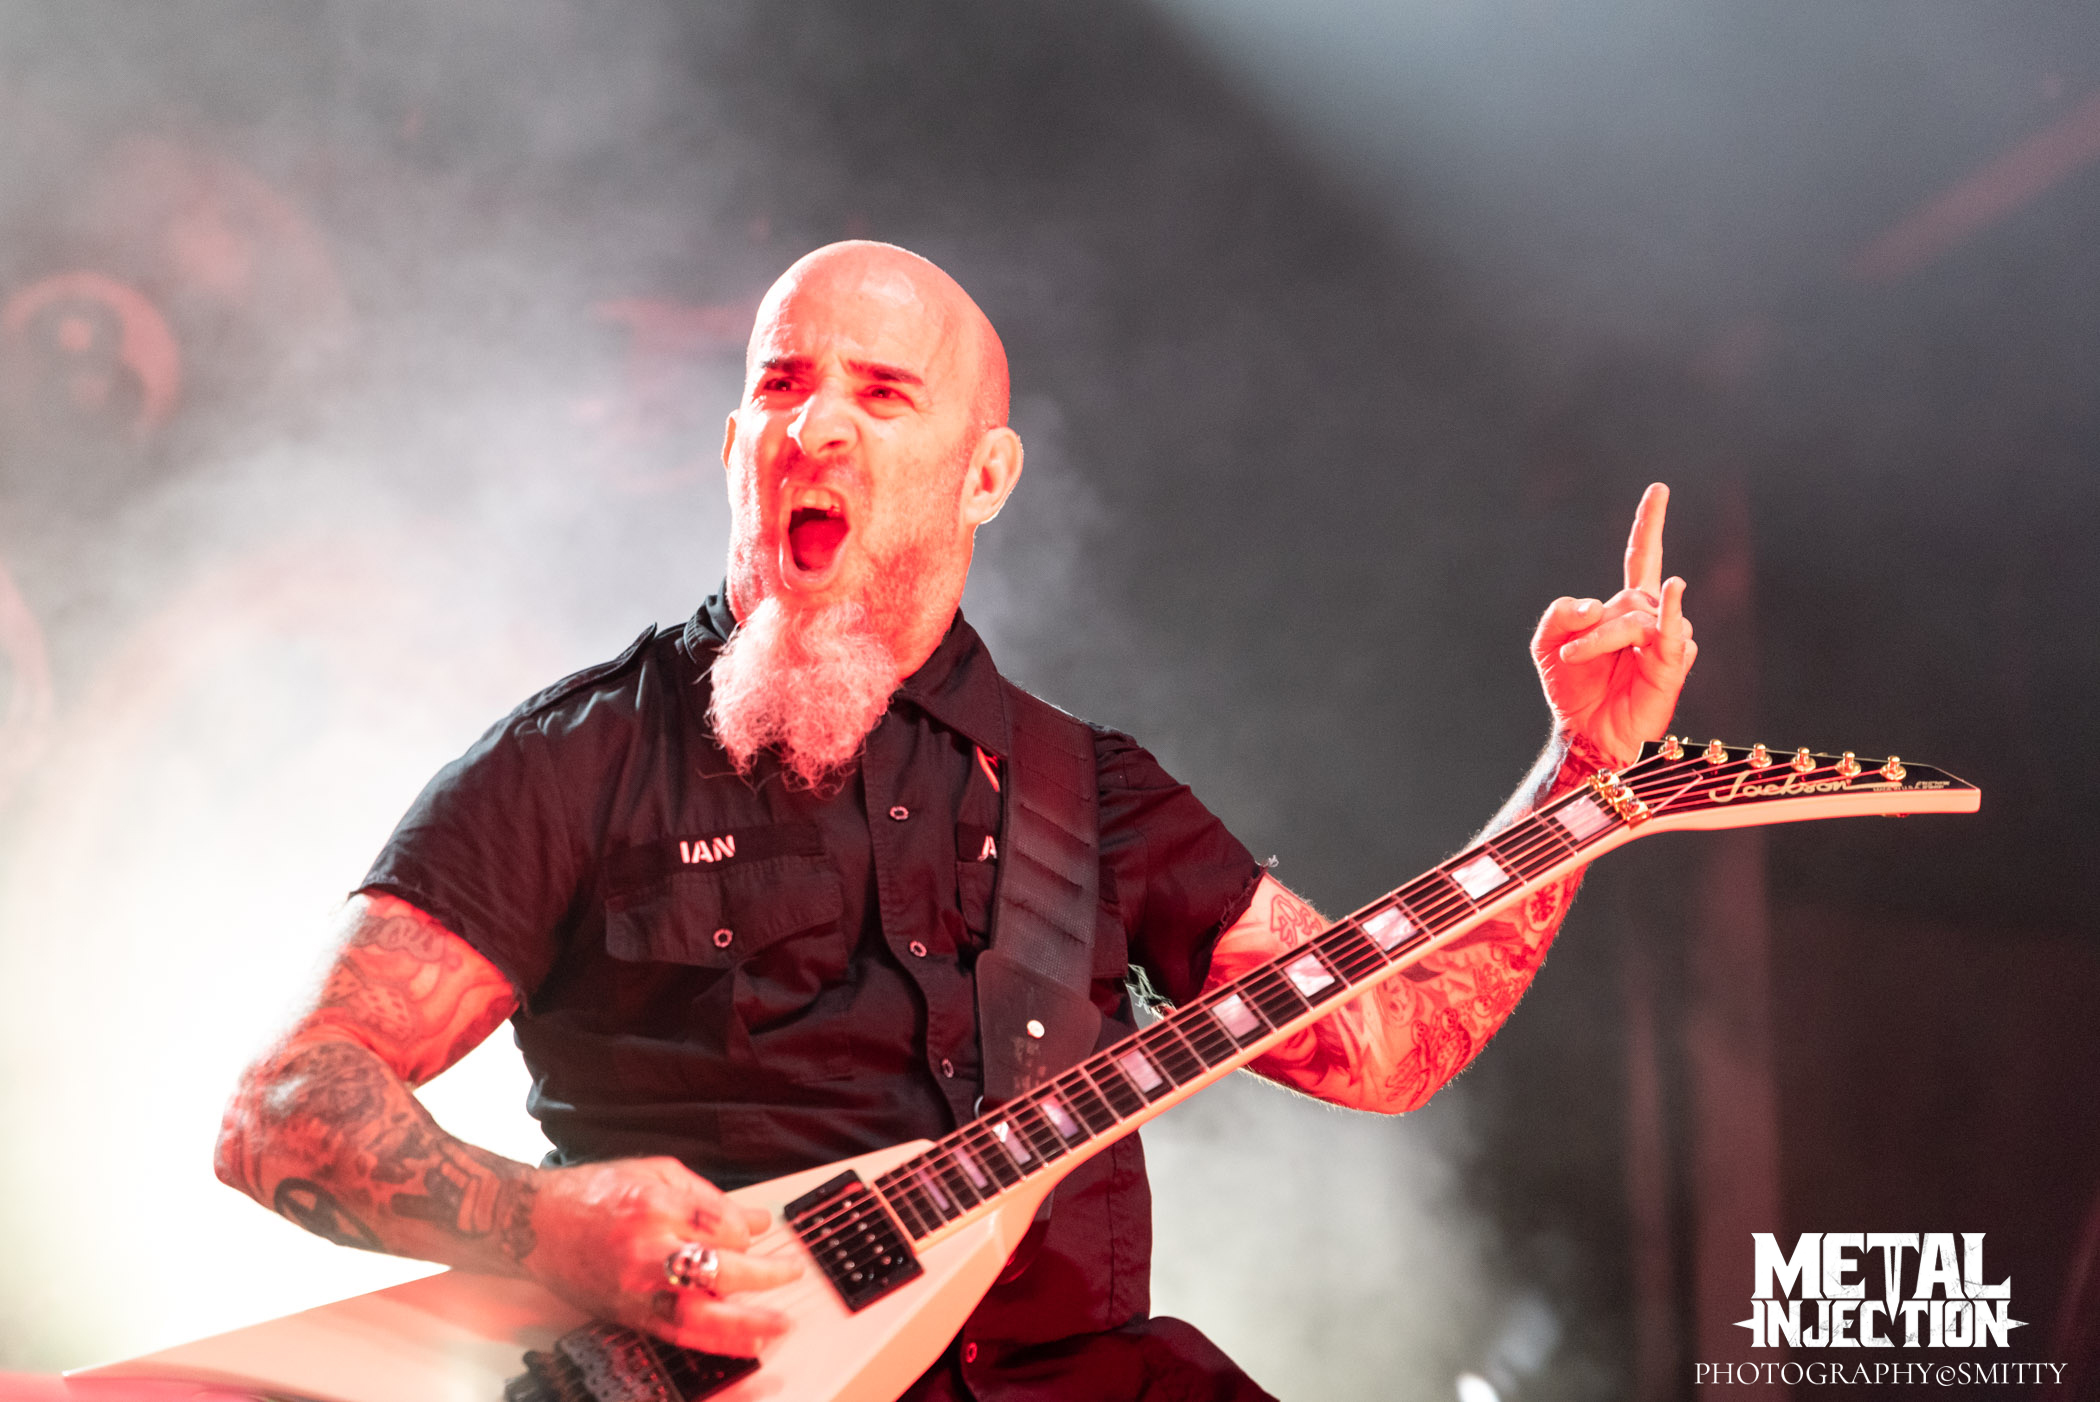 Photos: ANTHRAX, BLACK LABEL SOCIETY & HATEBREED Brought The Heat On Coney Island